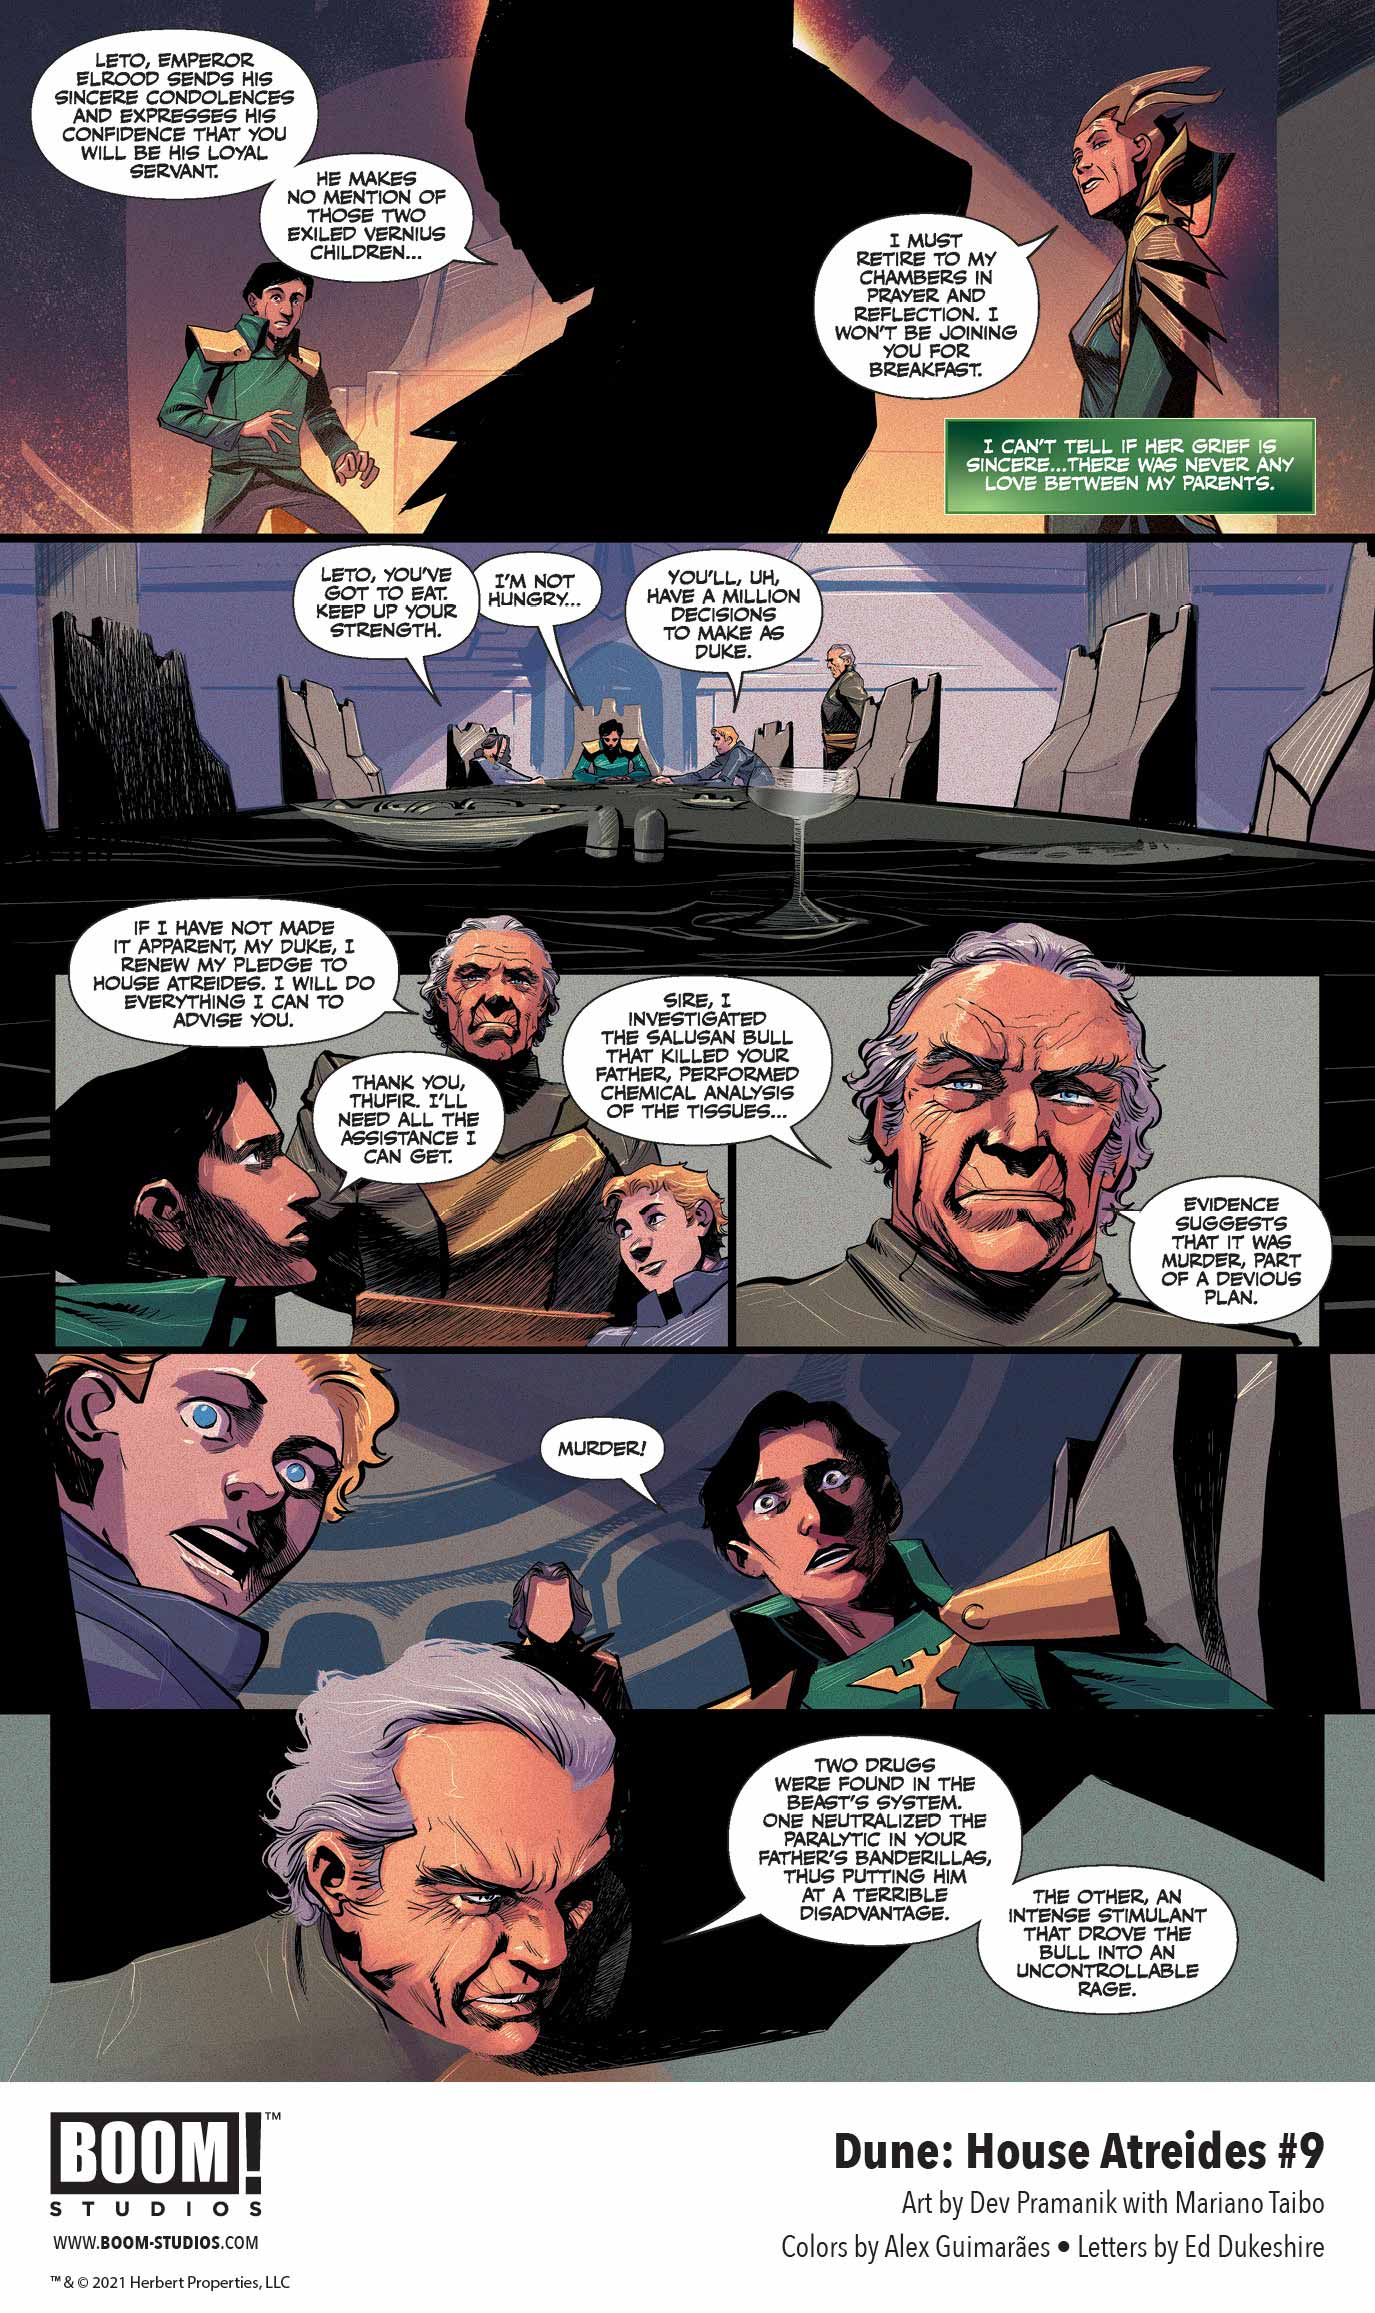 Dune: House Atreides comic series. Issue #9, preview page 2.